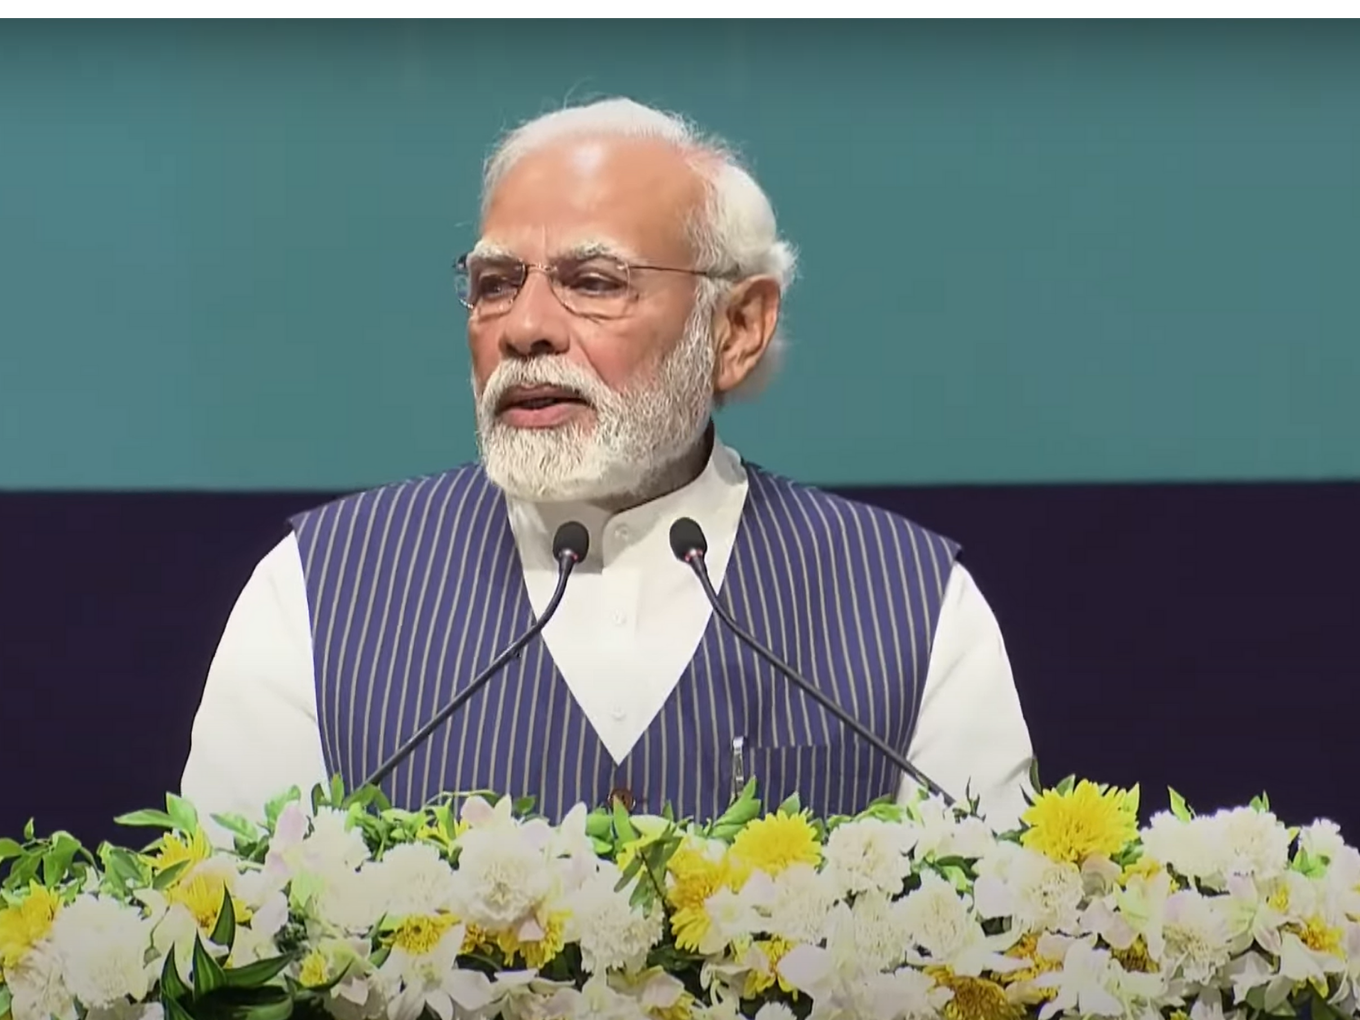 PM Modi Launches Various Digital India Initiatives To Boost Startups